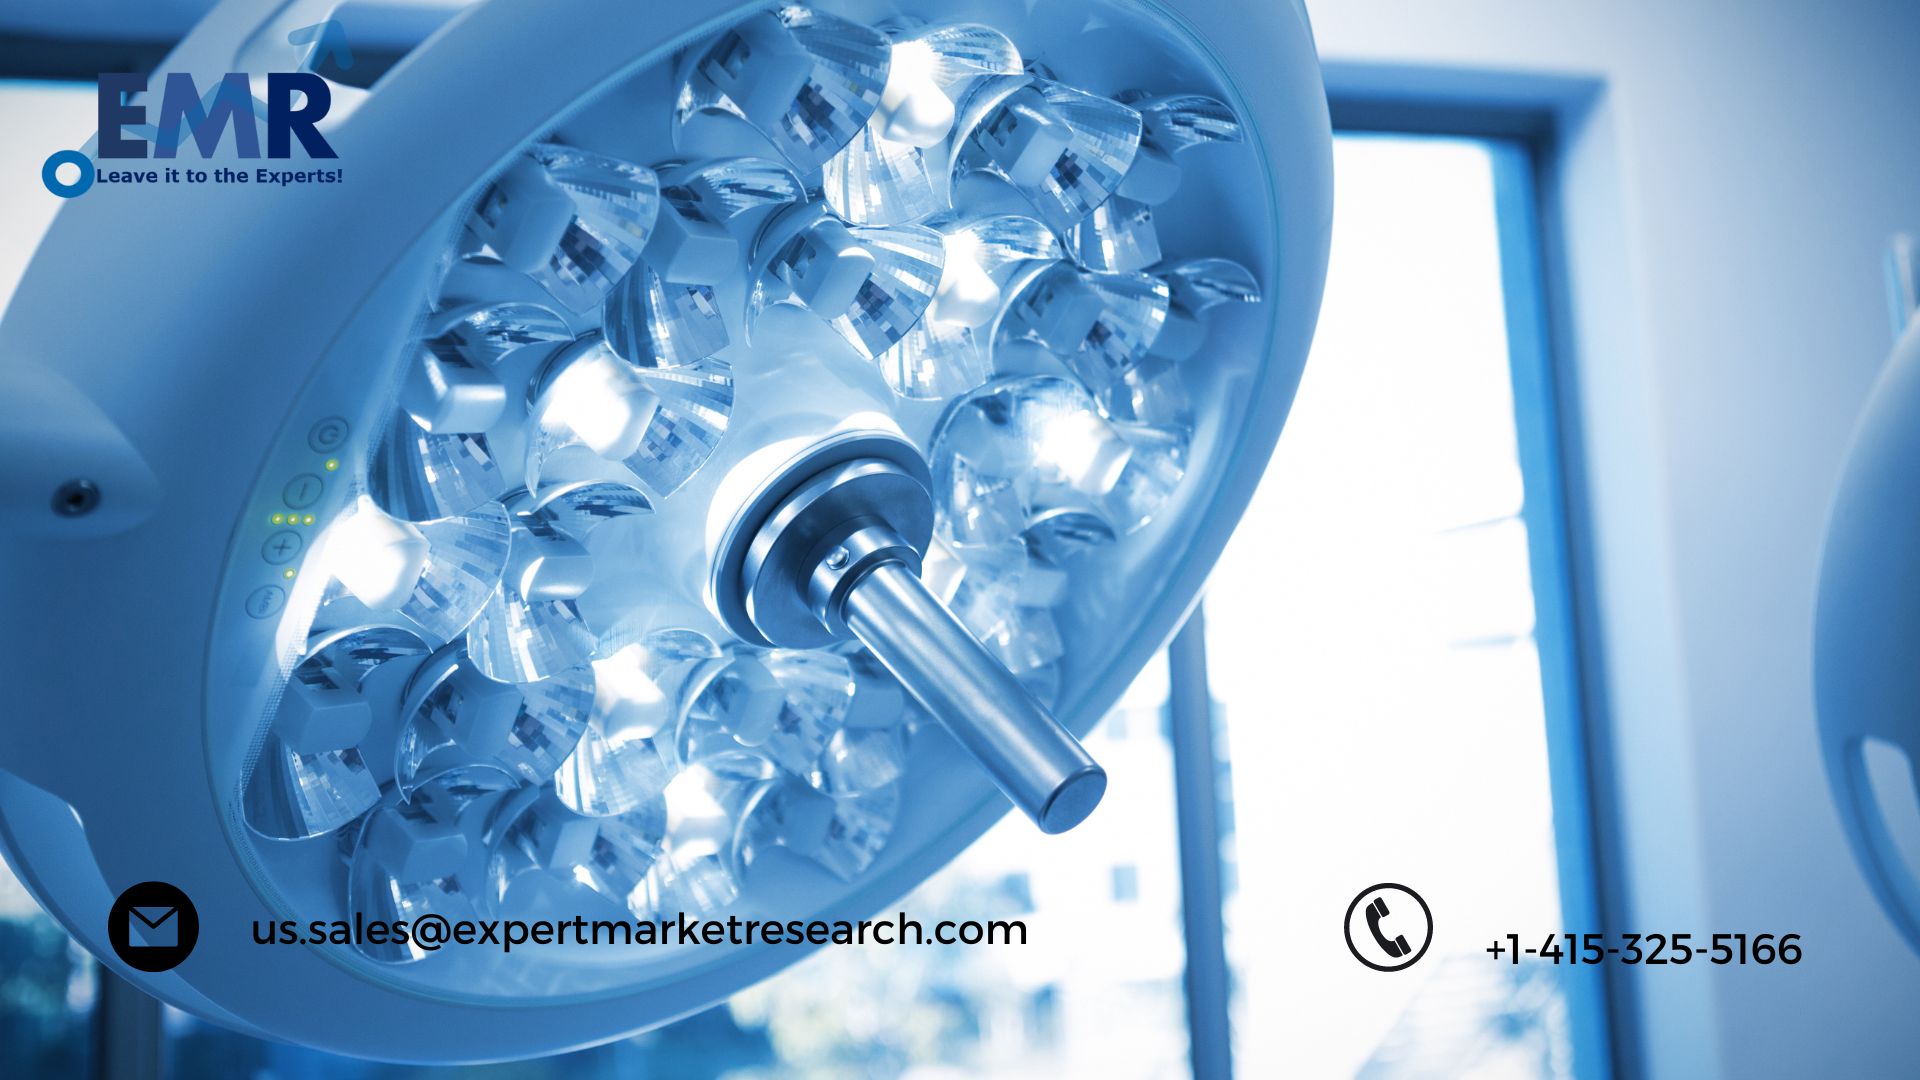 Global Surgical Lights Market Size, Share, Price, Growth, Key Players, Analysis, Report, Forecast 2021-2026 | EMR Inc.